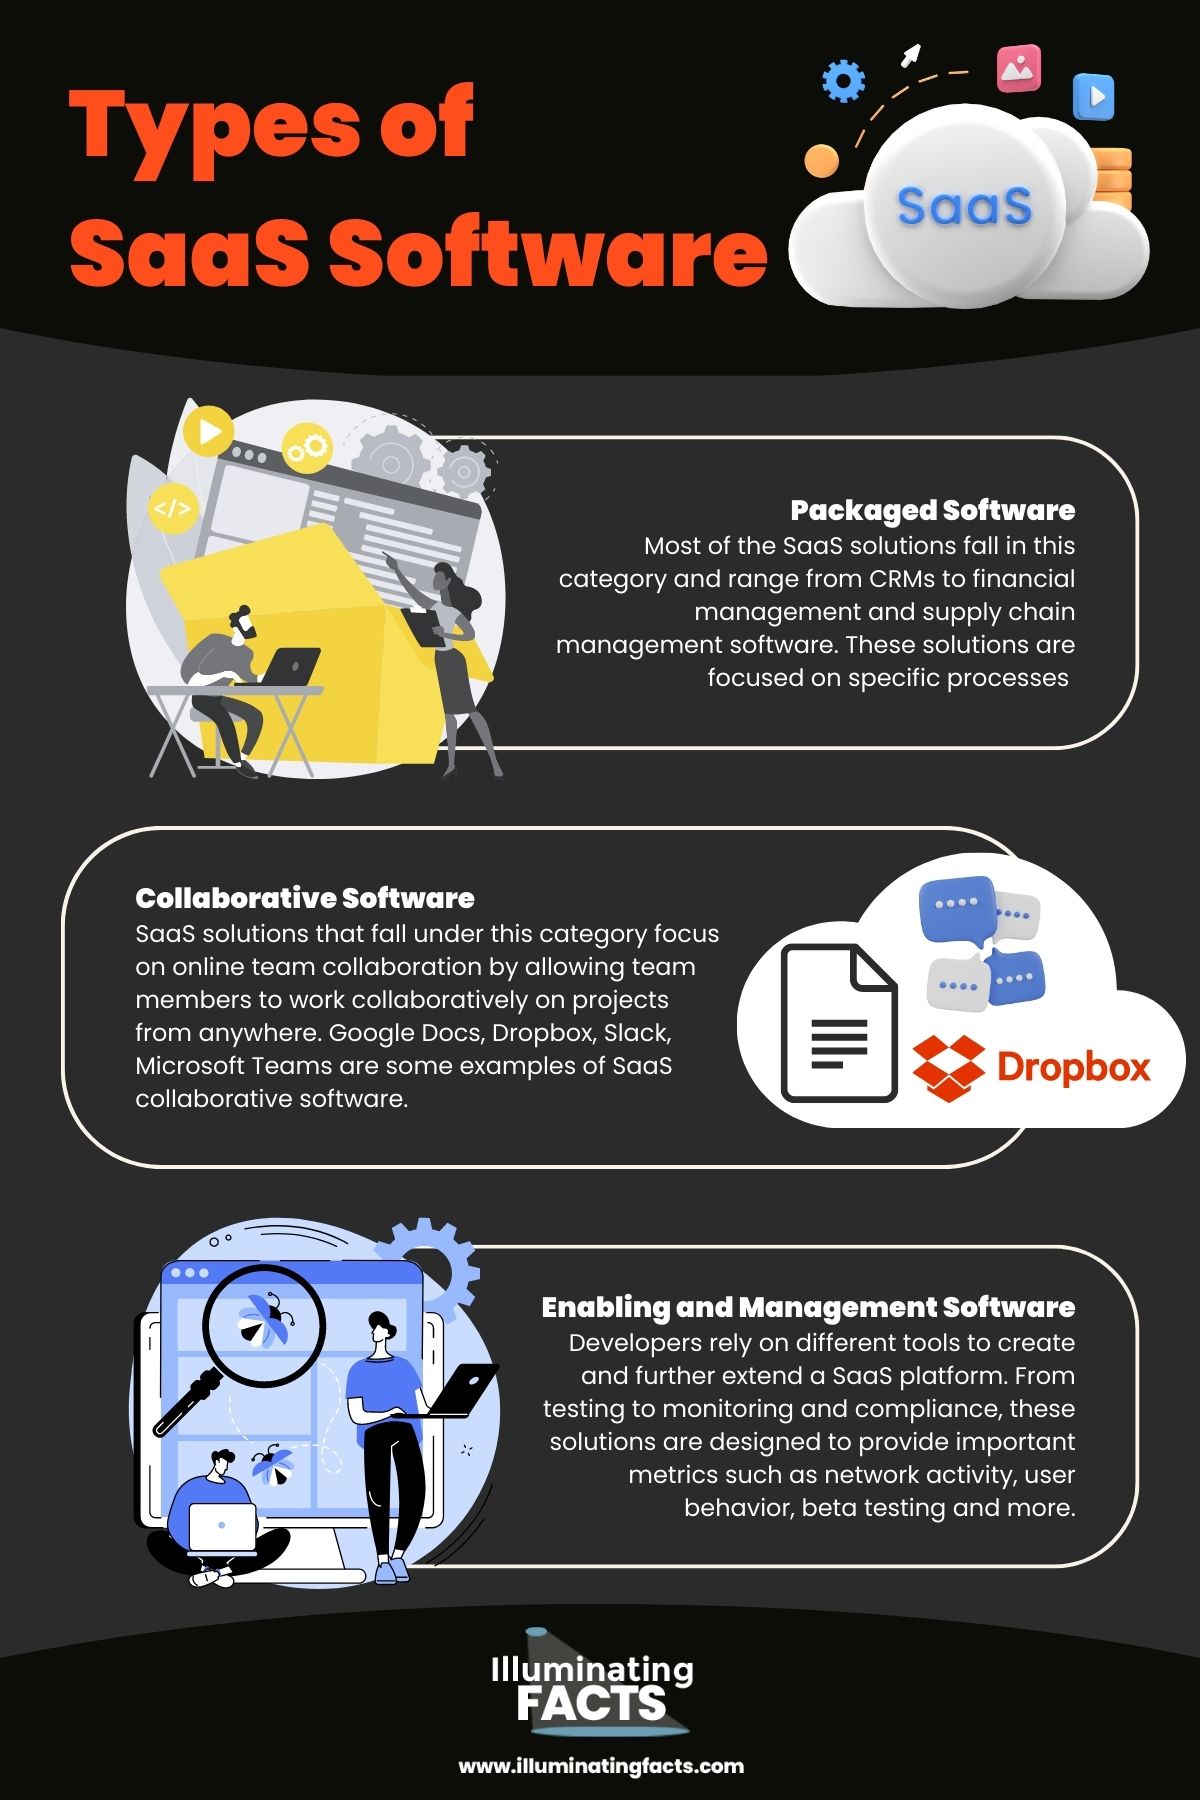 An infographic detailing some of the different types of SaaS software.